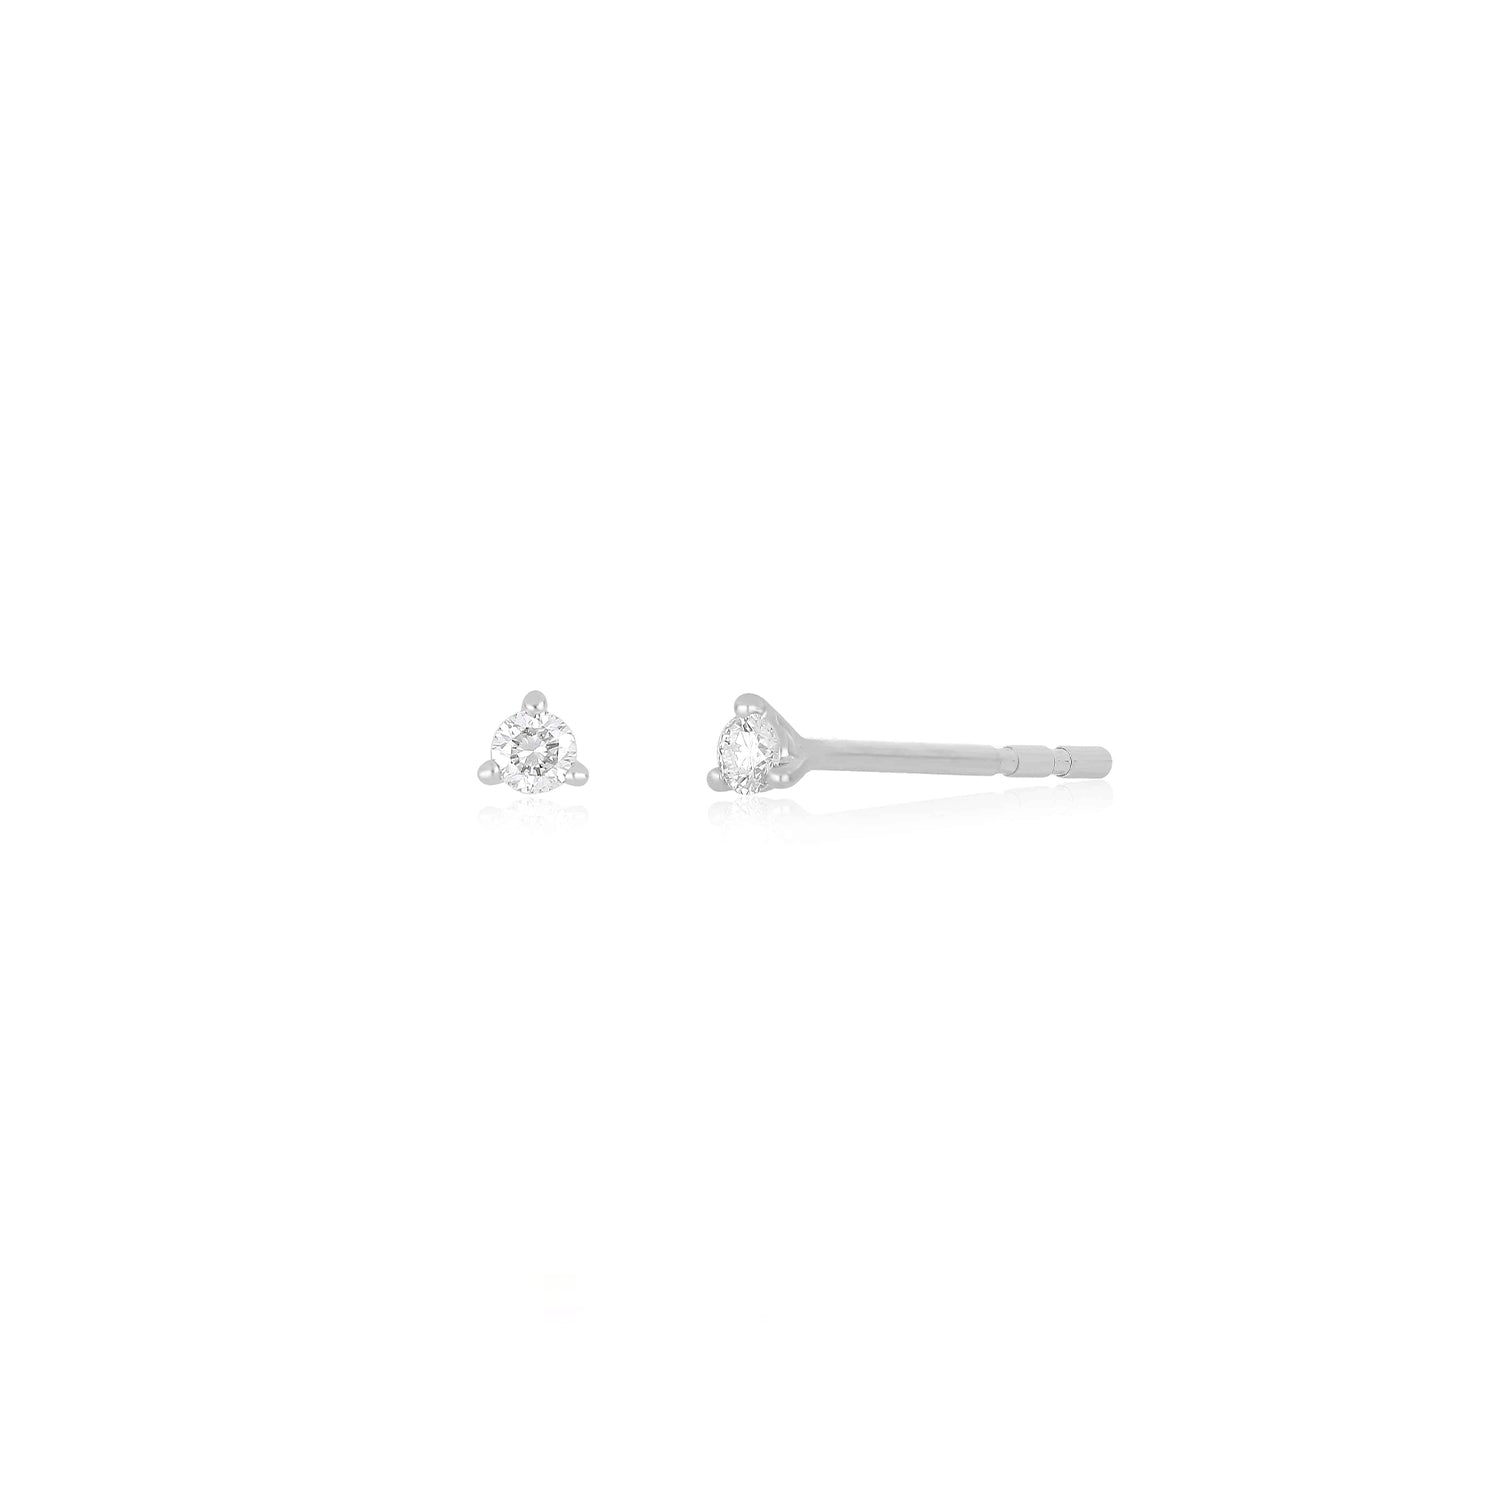 Baby Solitaire Diamond Stud Earring in 14k white gold